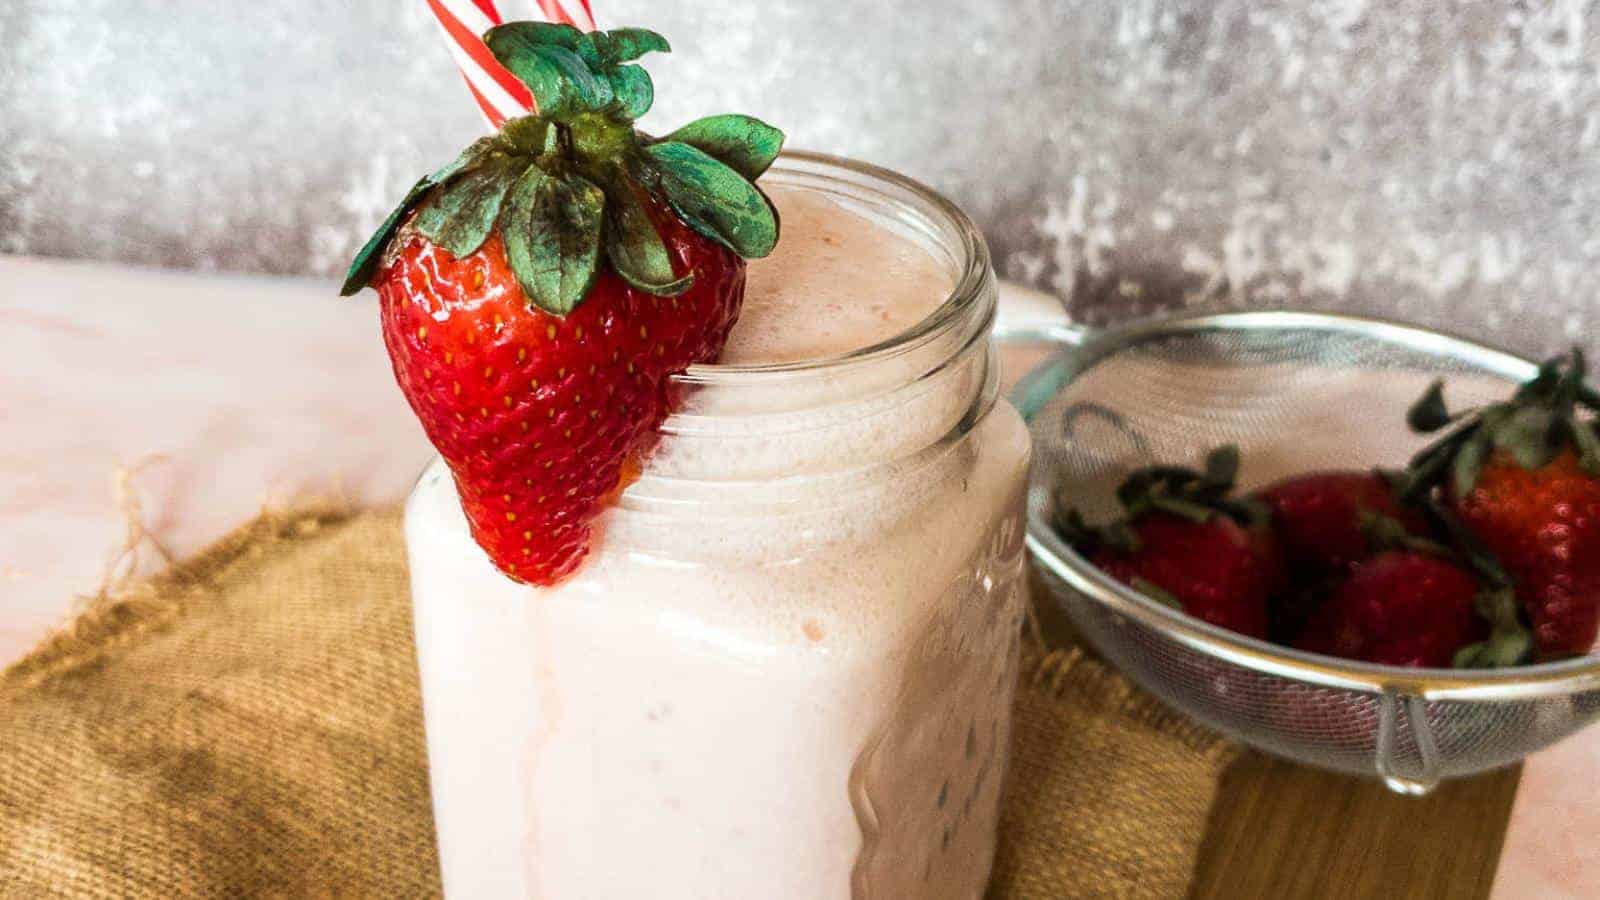 <p>Indulge in a guilt-free treat with Strawberry Cheesecake Indulgence-a lazy breakfast option that combines fruity sweetness with creamy indulgence. Blend up this delicious concoction effortlessly for a delightful start to your day.<br><strong>Get the Recipe: </strong><a href="https://www.primaledgehealth.com/keto-strawberry-cheesecake-smoothie/?utm_source=msn&utm_medium=page&utm_campaign=18 extremely quick and easy breakfast ideas for lazy people">Strawberry Cheesecake Indulgence</a></p>